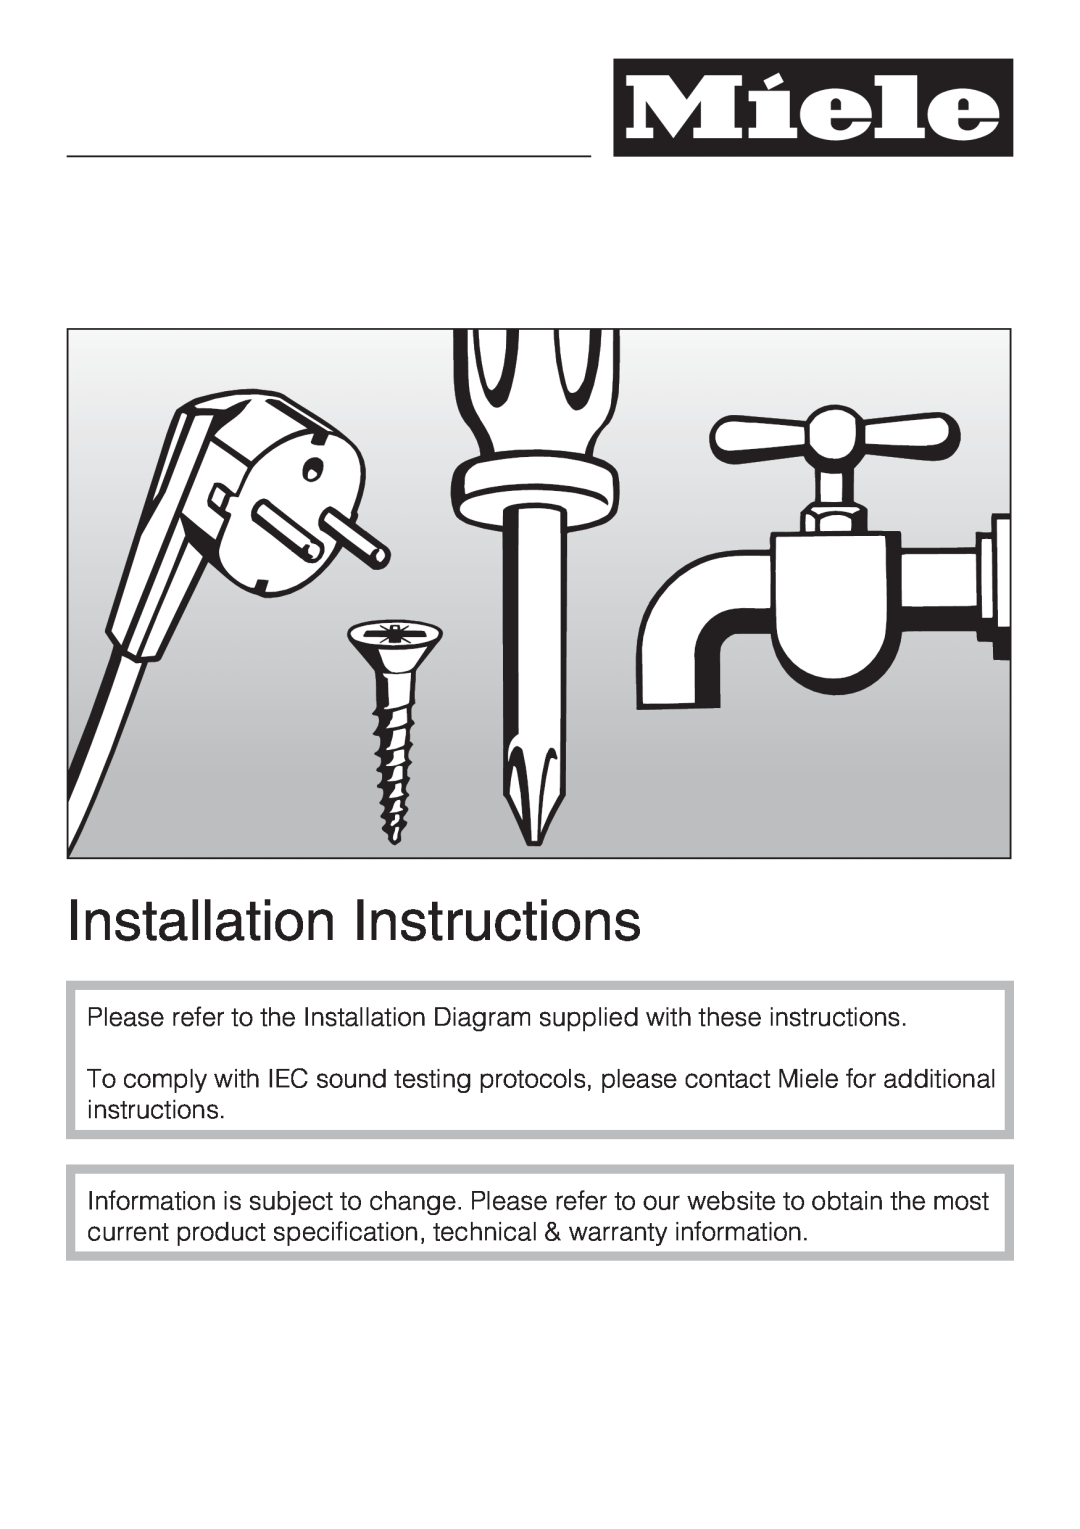 Miele G2142 operating instructions Installation Instructions 